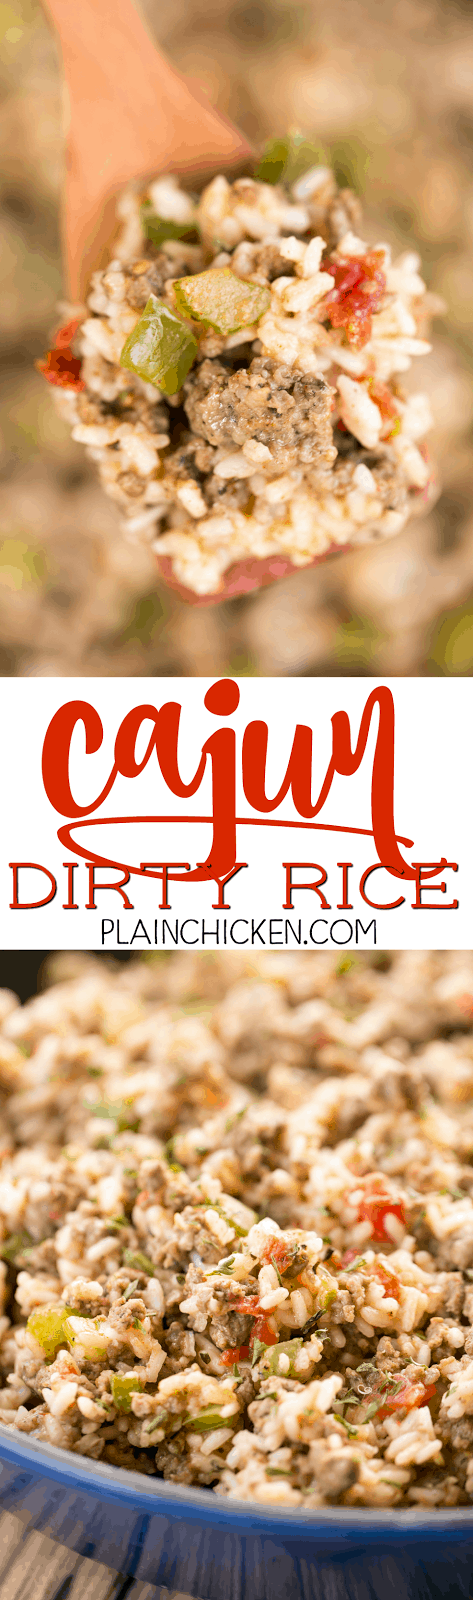 Cajun Dirty Rice - delicious one-pot meal!! Ready in under 30 minutes! Great for Mardi Gras parties!!! Ground beef, pork sausage, onion, bell pepper, celery, cajun seasoning, rice, chicken broth and diced tomatoes and green chiles. This was a huge hit in our house!